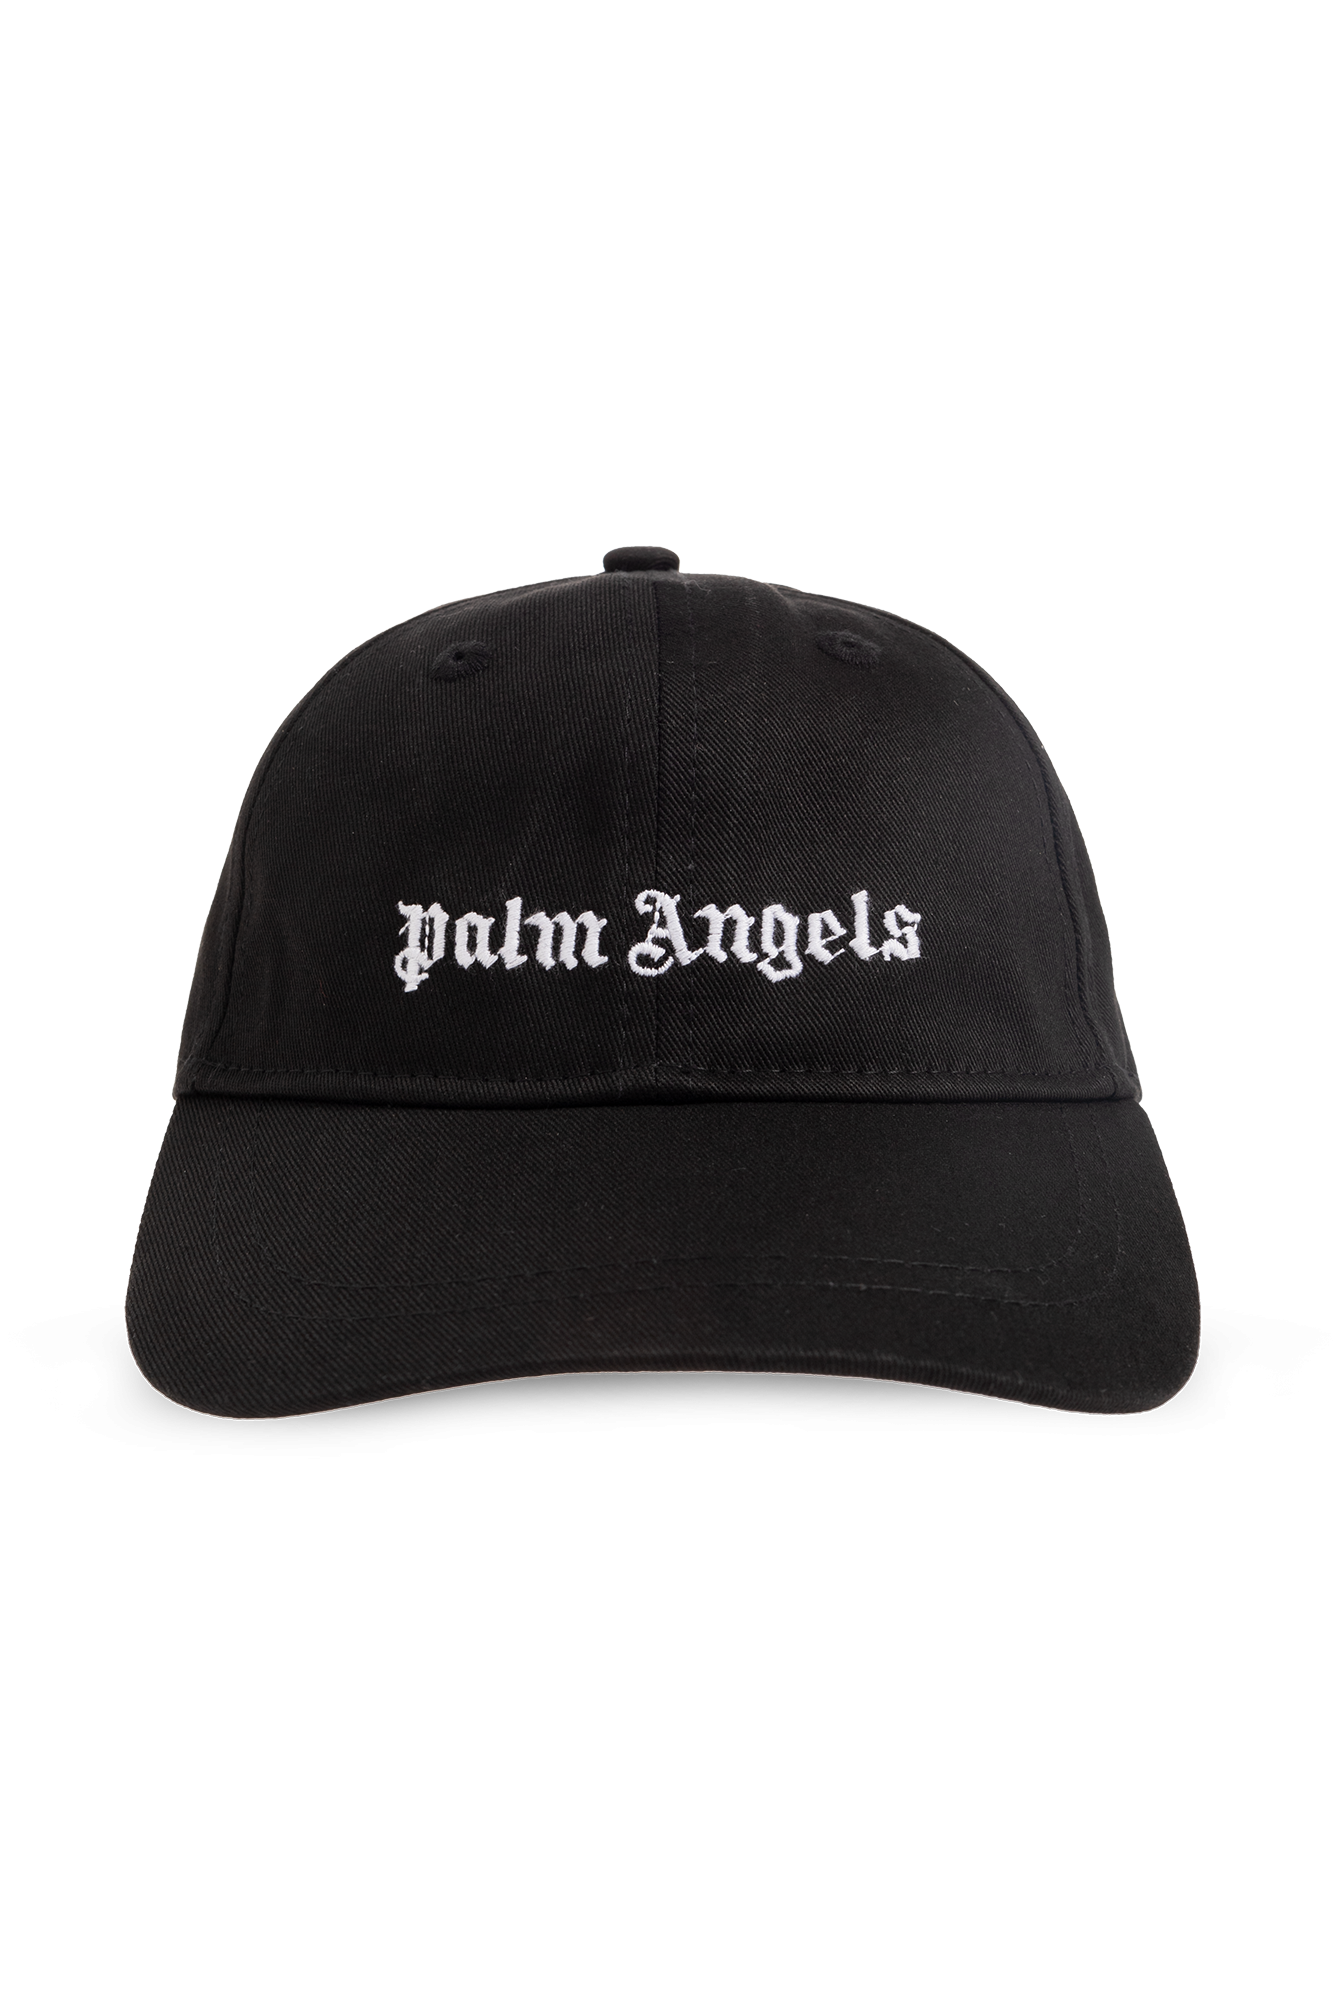 Palm Angels Kids Cap Baseball Unisex Pink Cotton Cap With Smile Patch